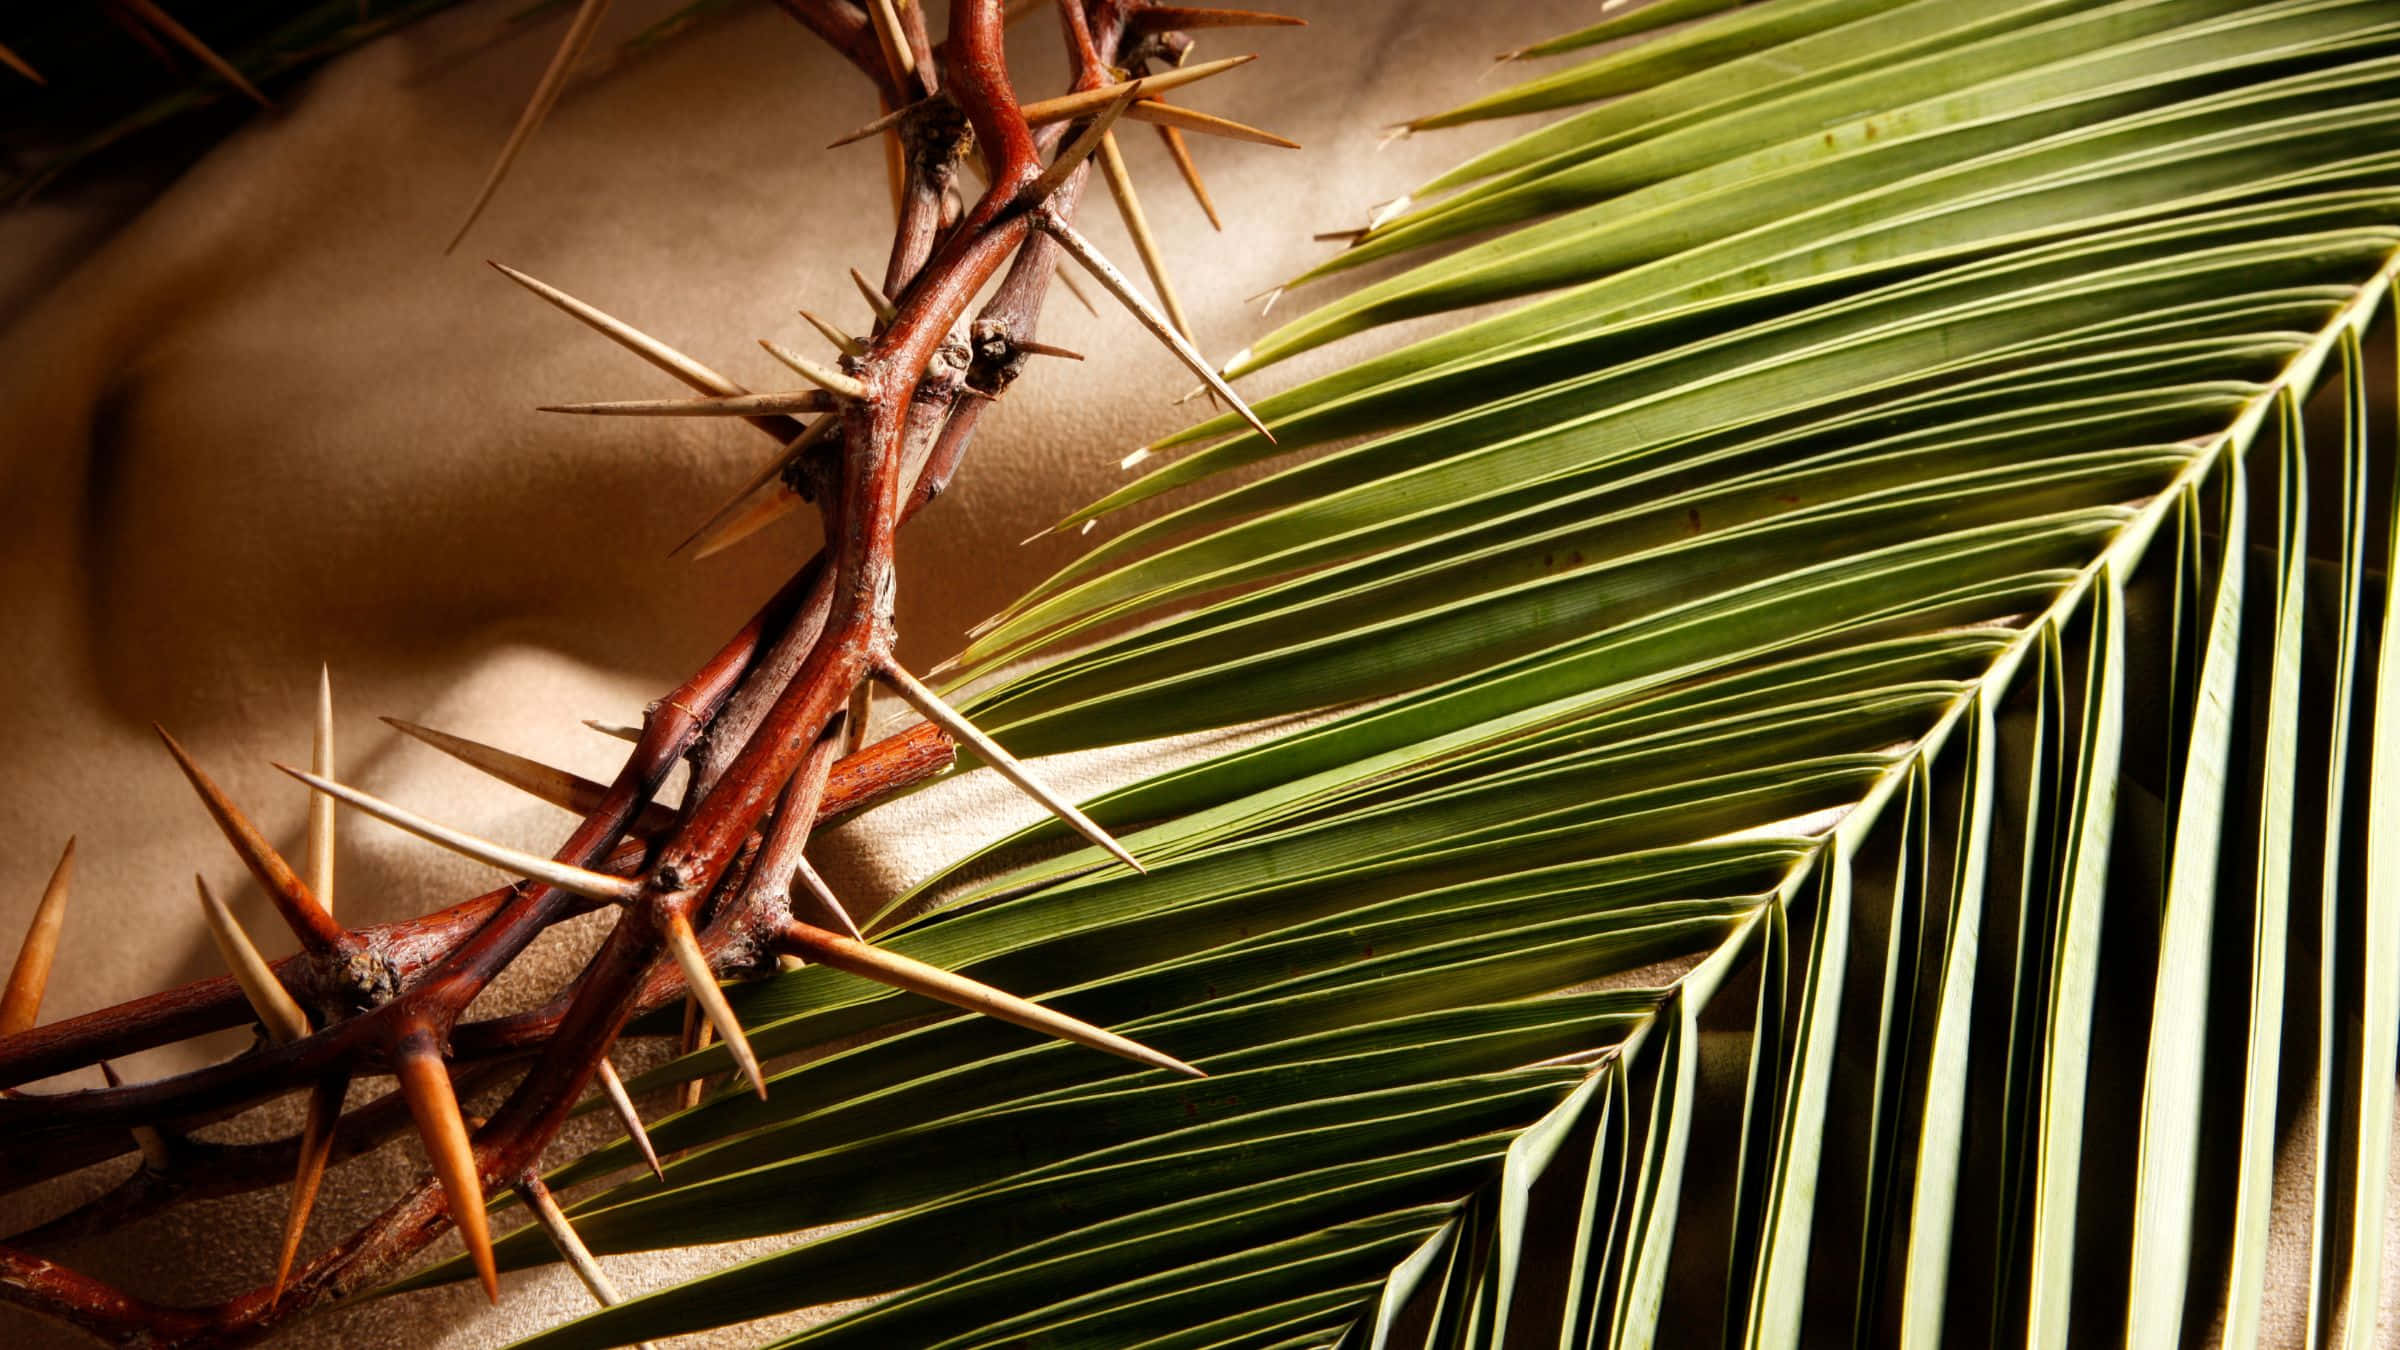 A Crown Of Thorns Is Placed On A Palm Leaf